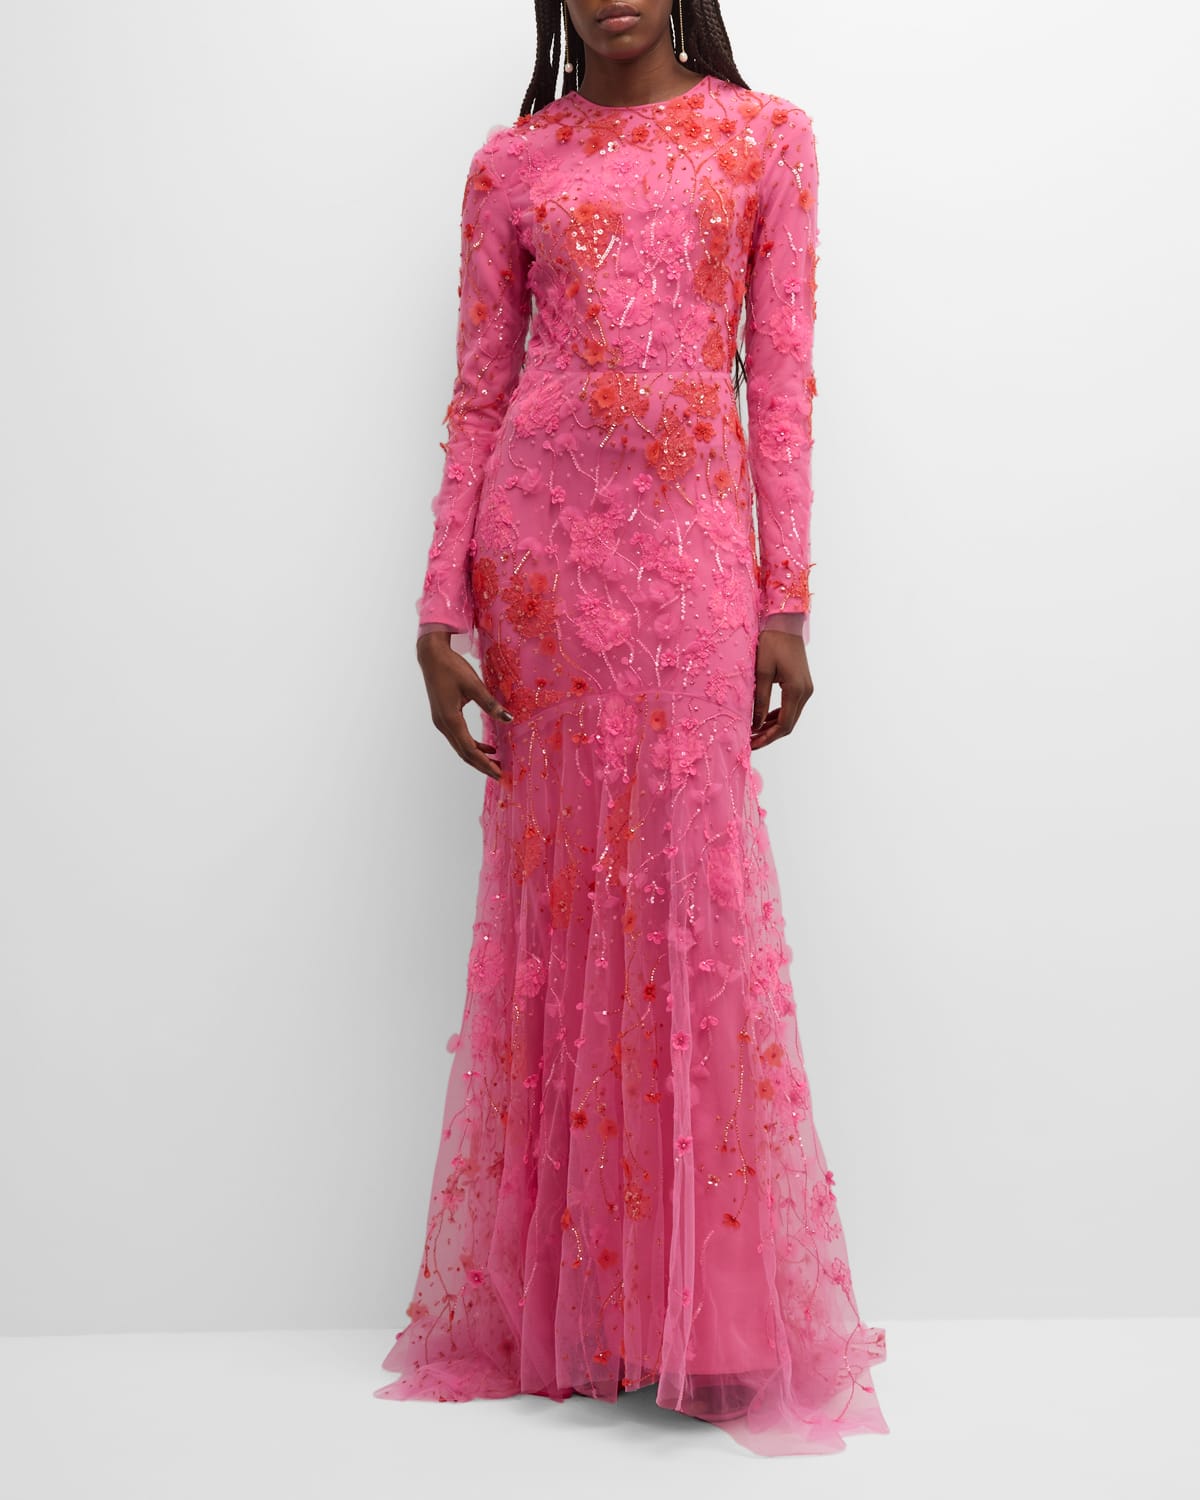 MONIQUE LHUILLIER EMBROIDERED FLORAL EVENING GOWN